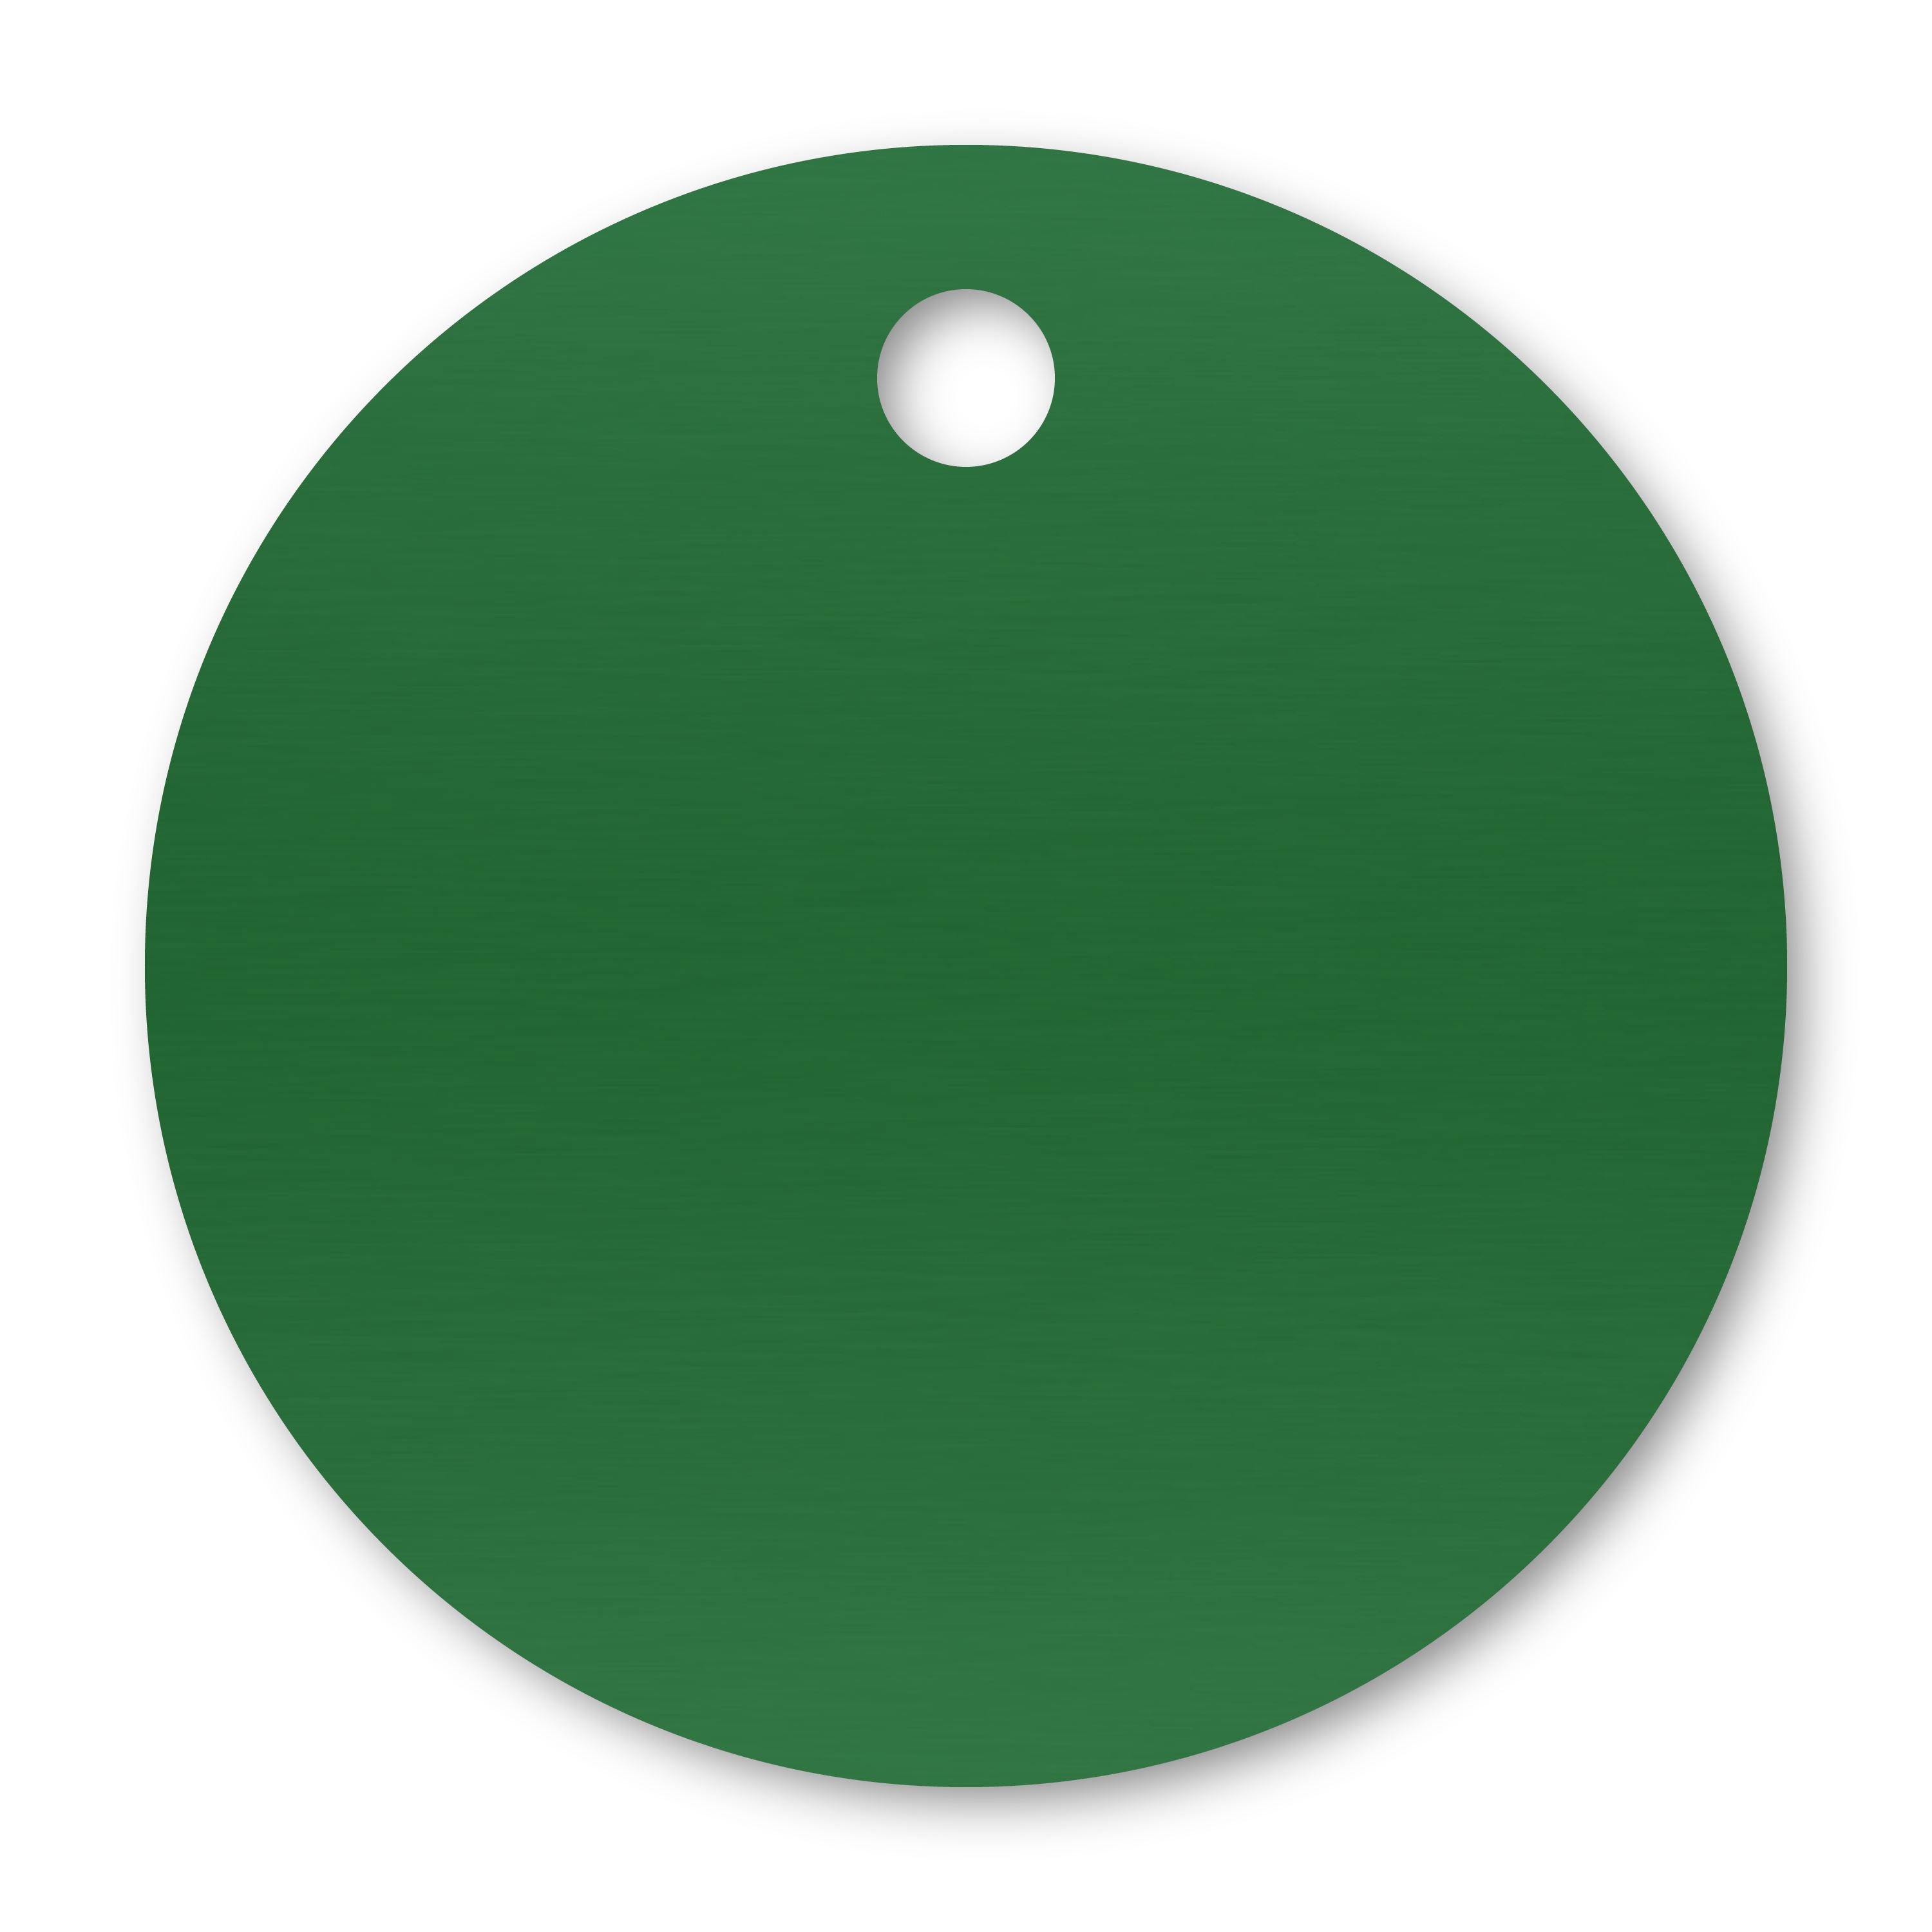 Anodized Aluminum Round Tags, 1" with 1/8" Hole, Laser Engraved Metal Tags Craftworks NW Green 